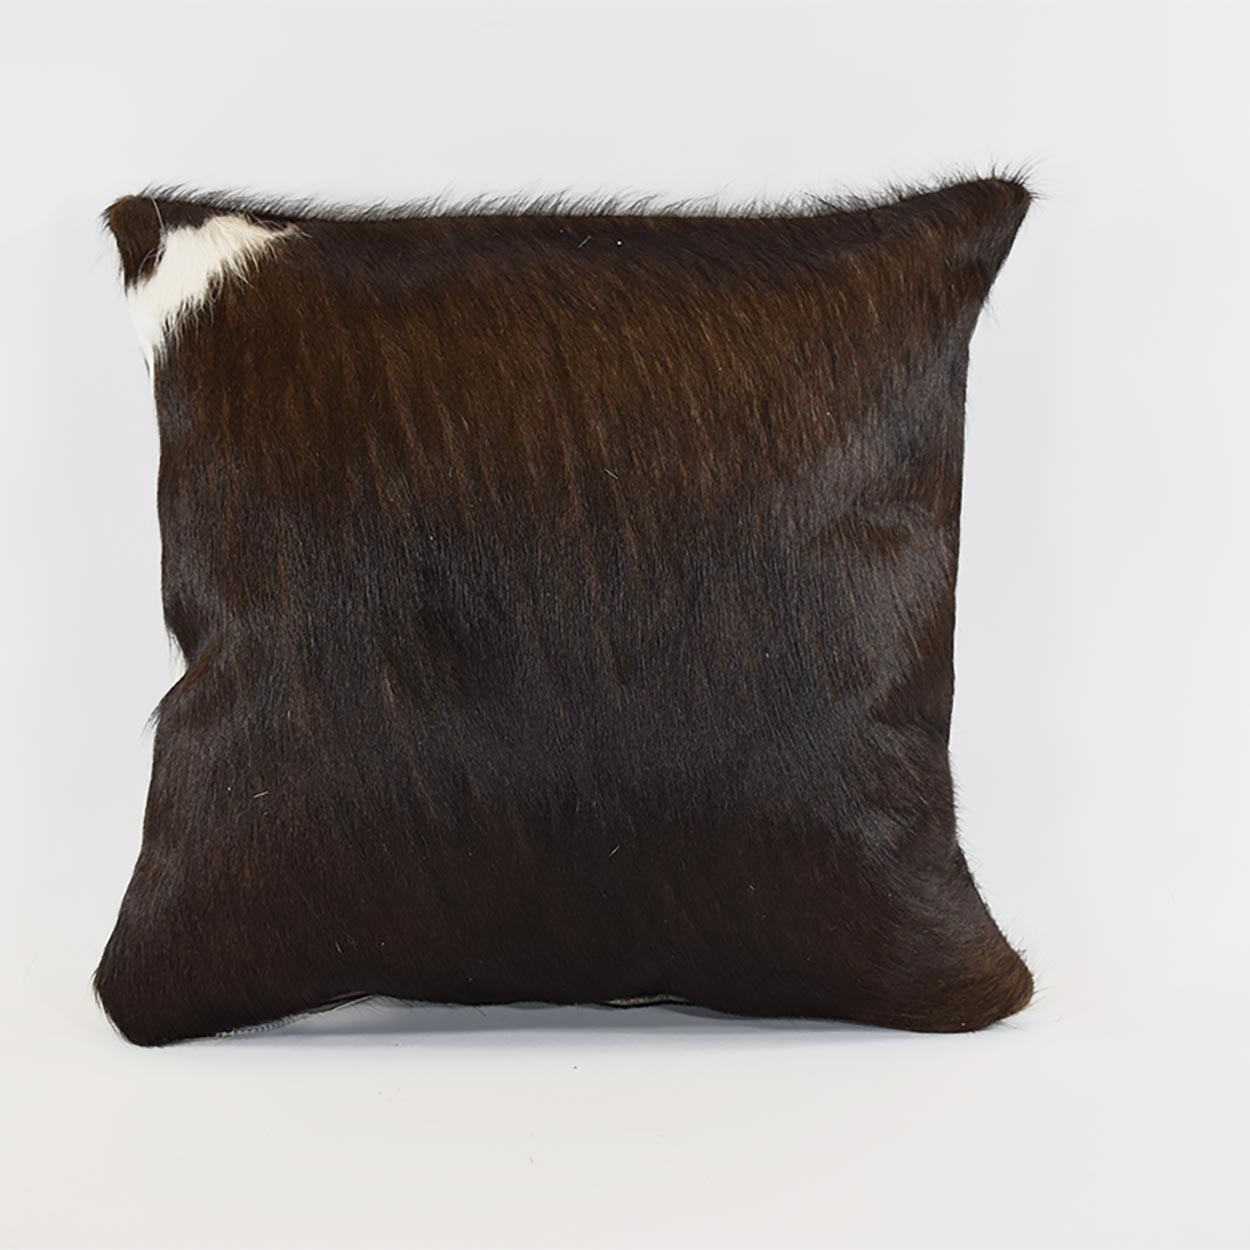 322027-1 - 15in x 15in Cowhide Pillow - 2-sided Espresso With White